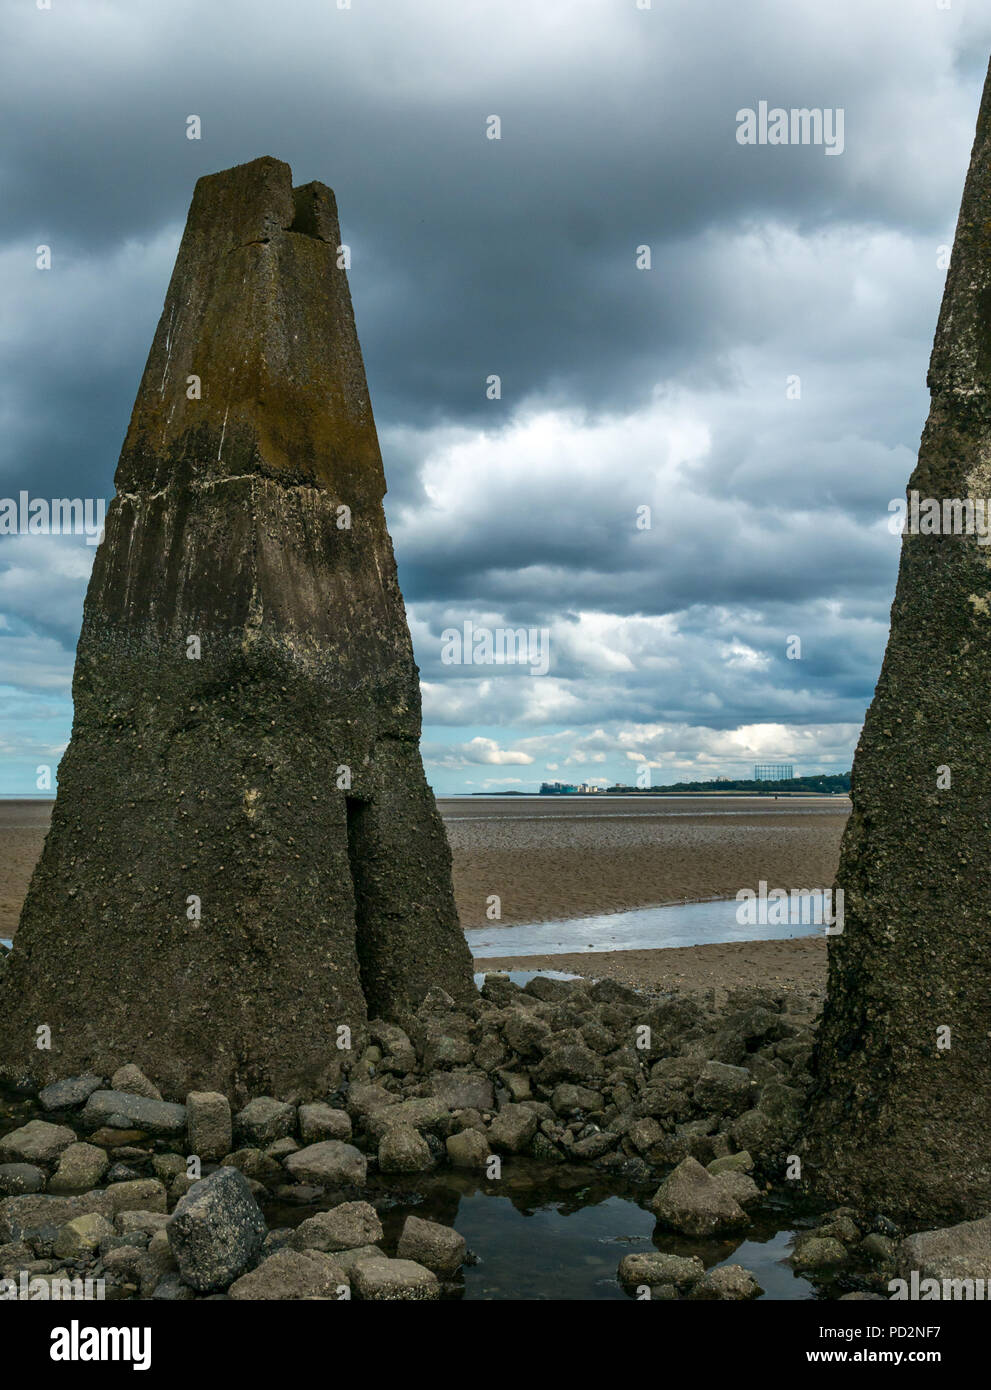 Remains of World War II concrete anti shipping barrier pylons in the Firth of Forth at low tide, Cramond, Edinburgh, Scotland, UK Stock Photo